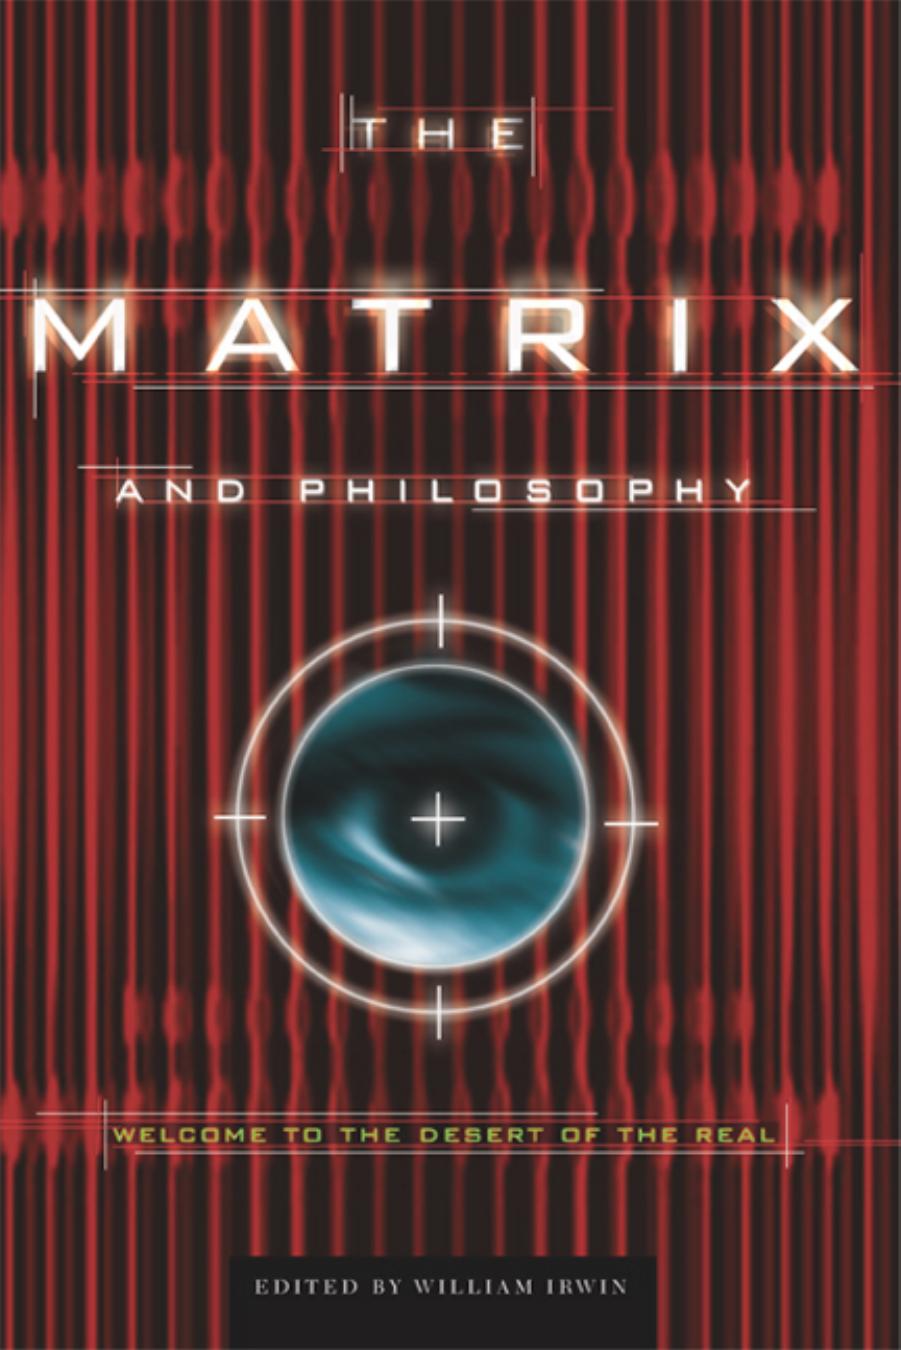 The Matrix and Philosophy - Welcome to the Desert of the Real